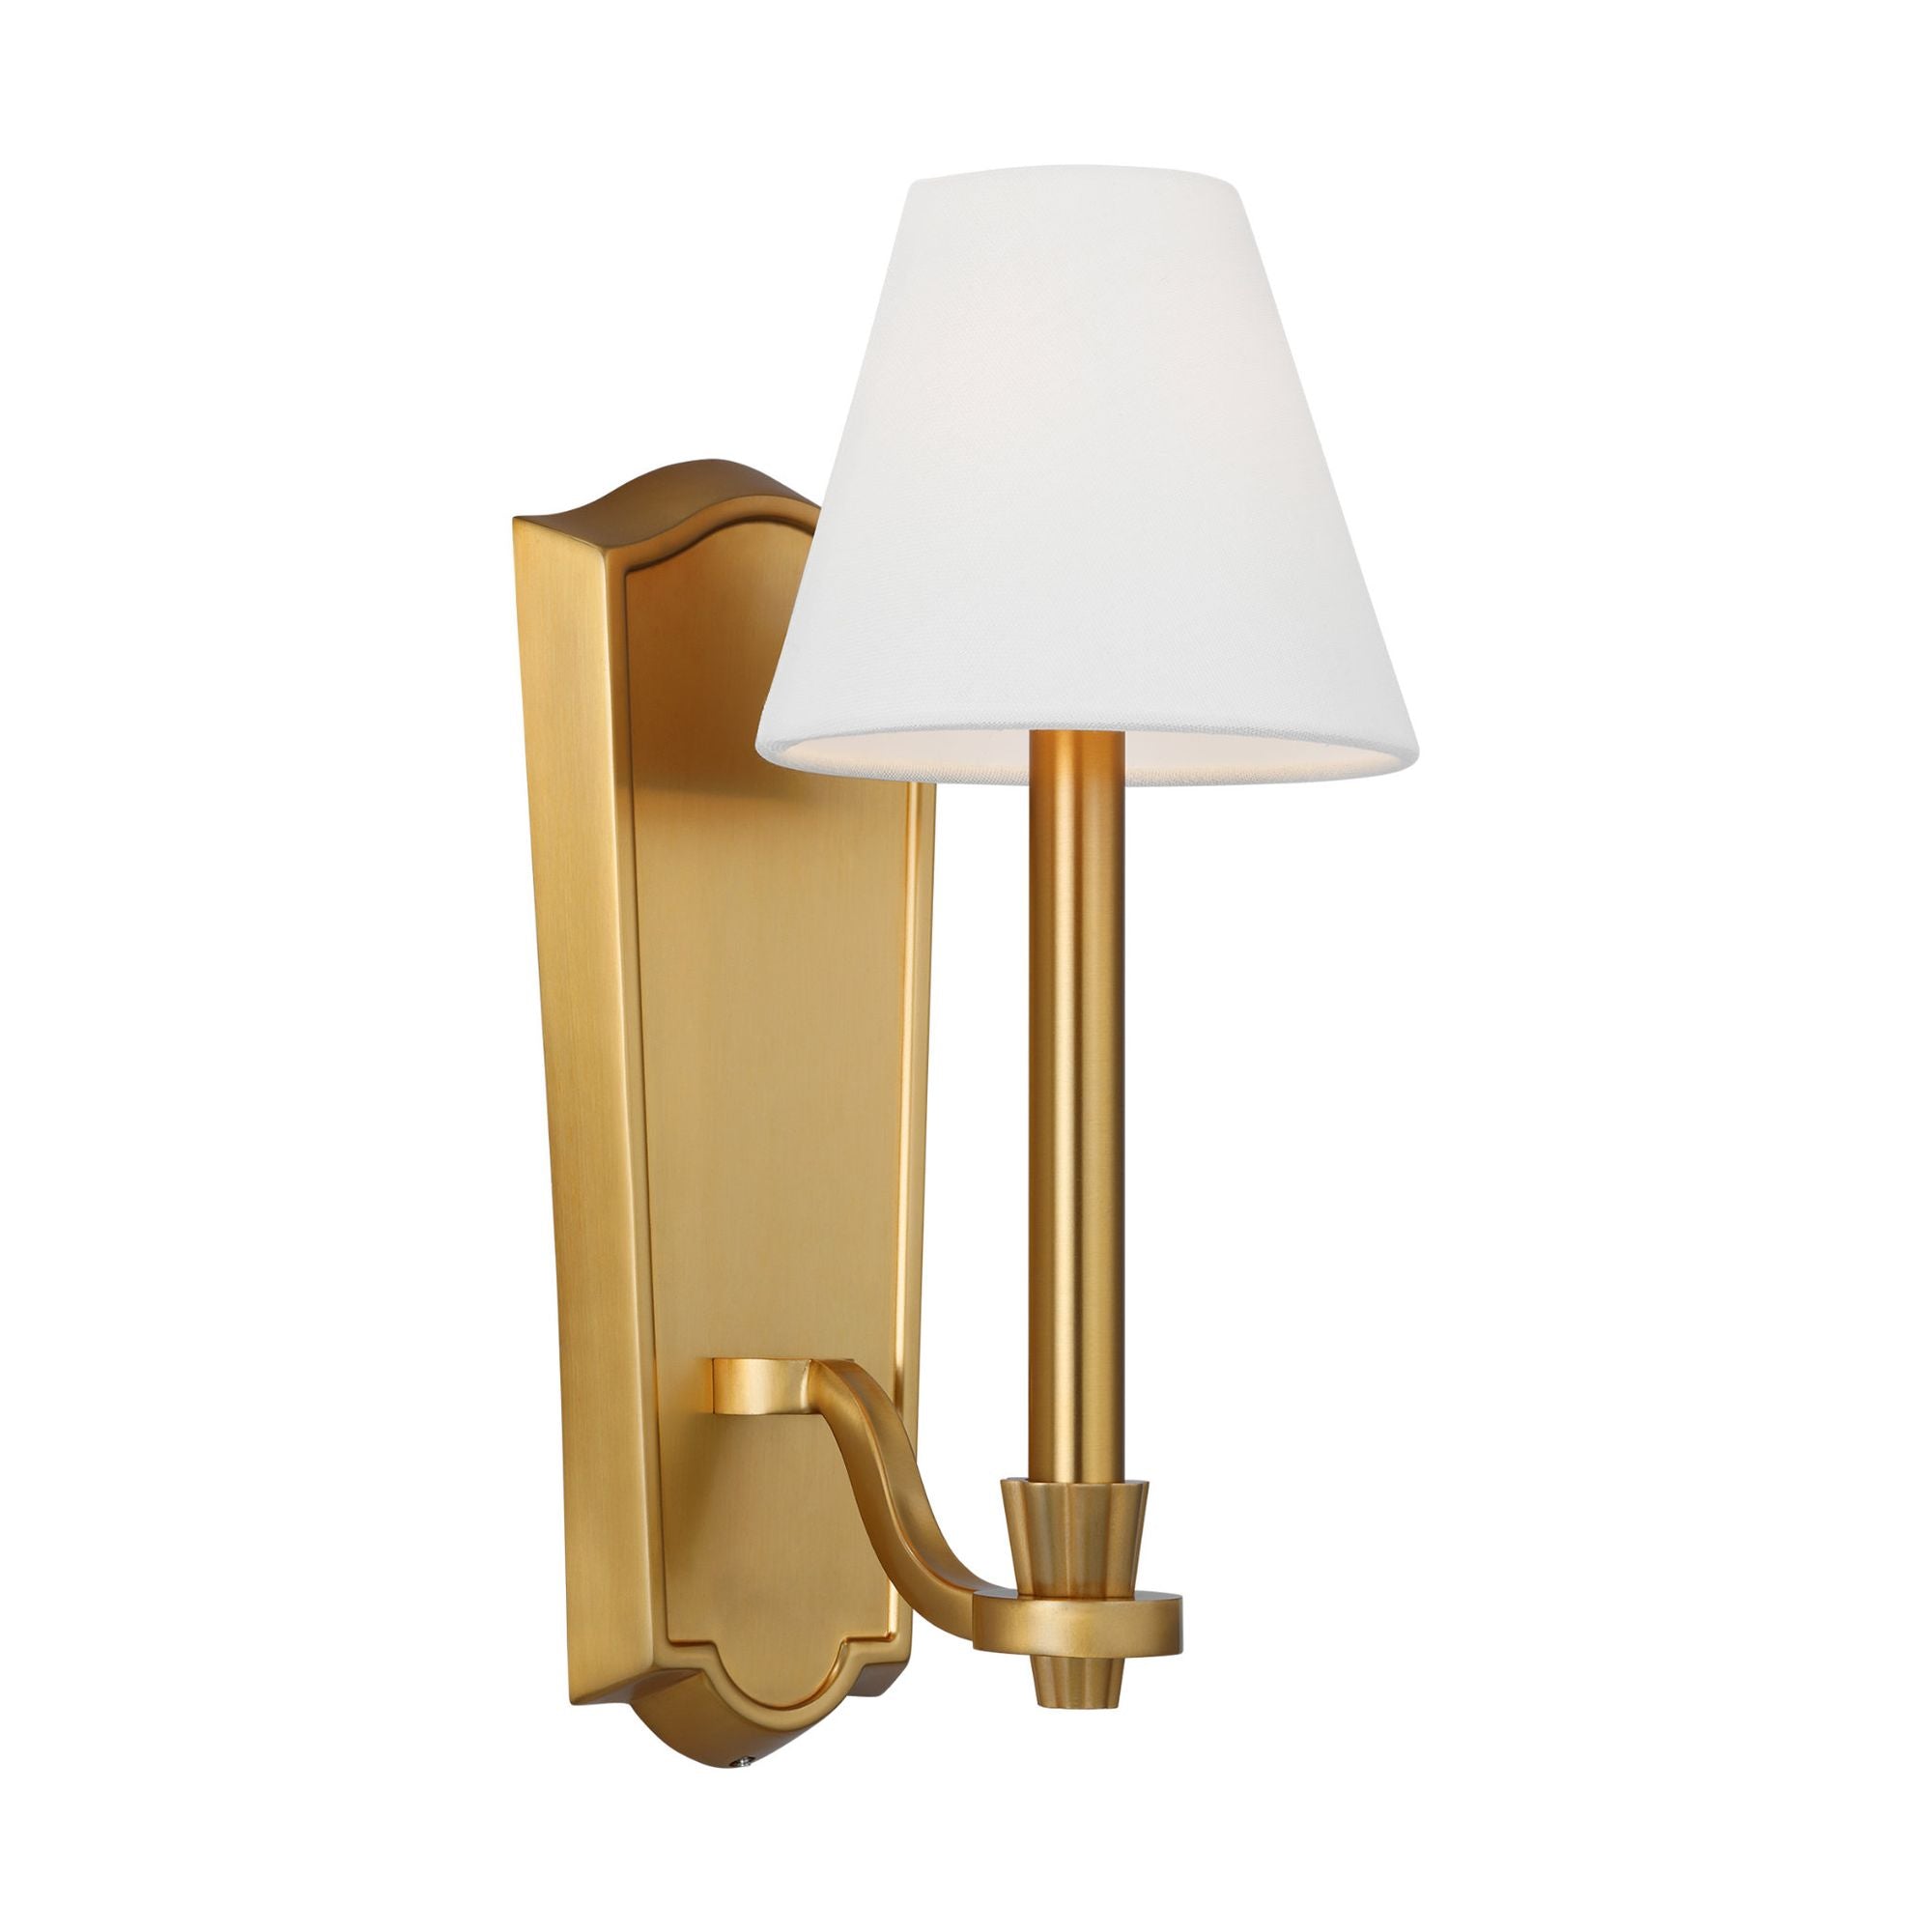 Alexa Hampton Paisley Tall Sconce in Burnished Brass